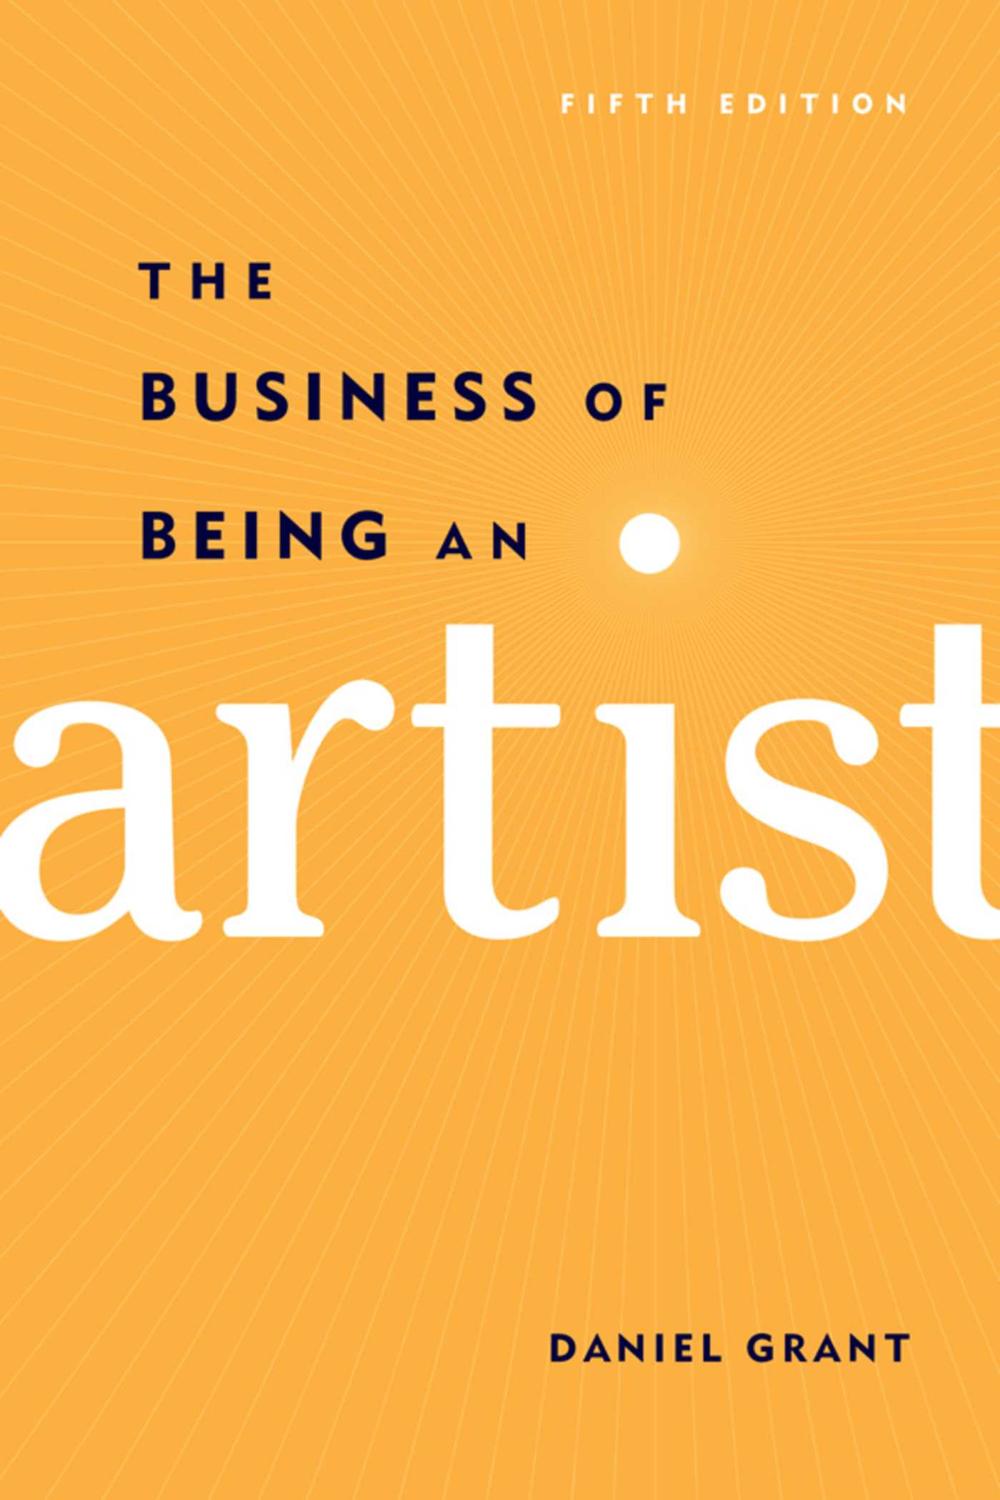 The Business of Being an Artist PDF Free Download 64 bit